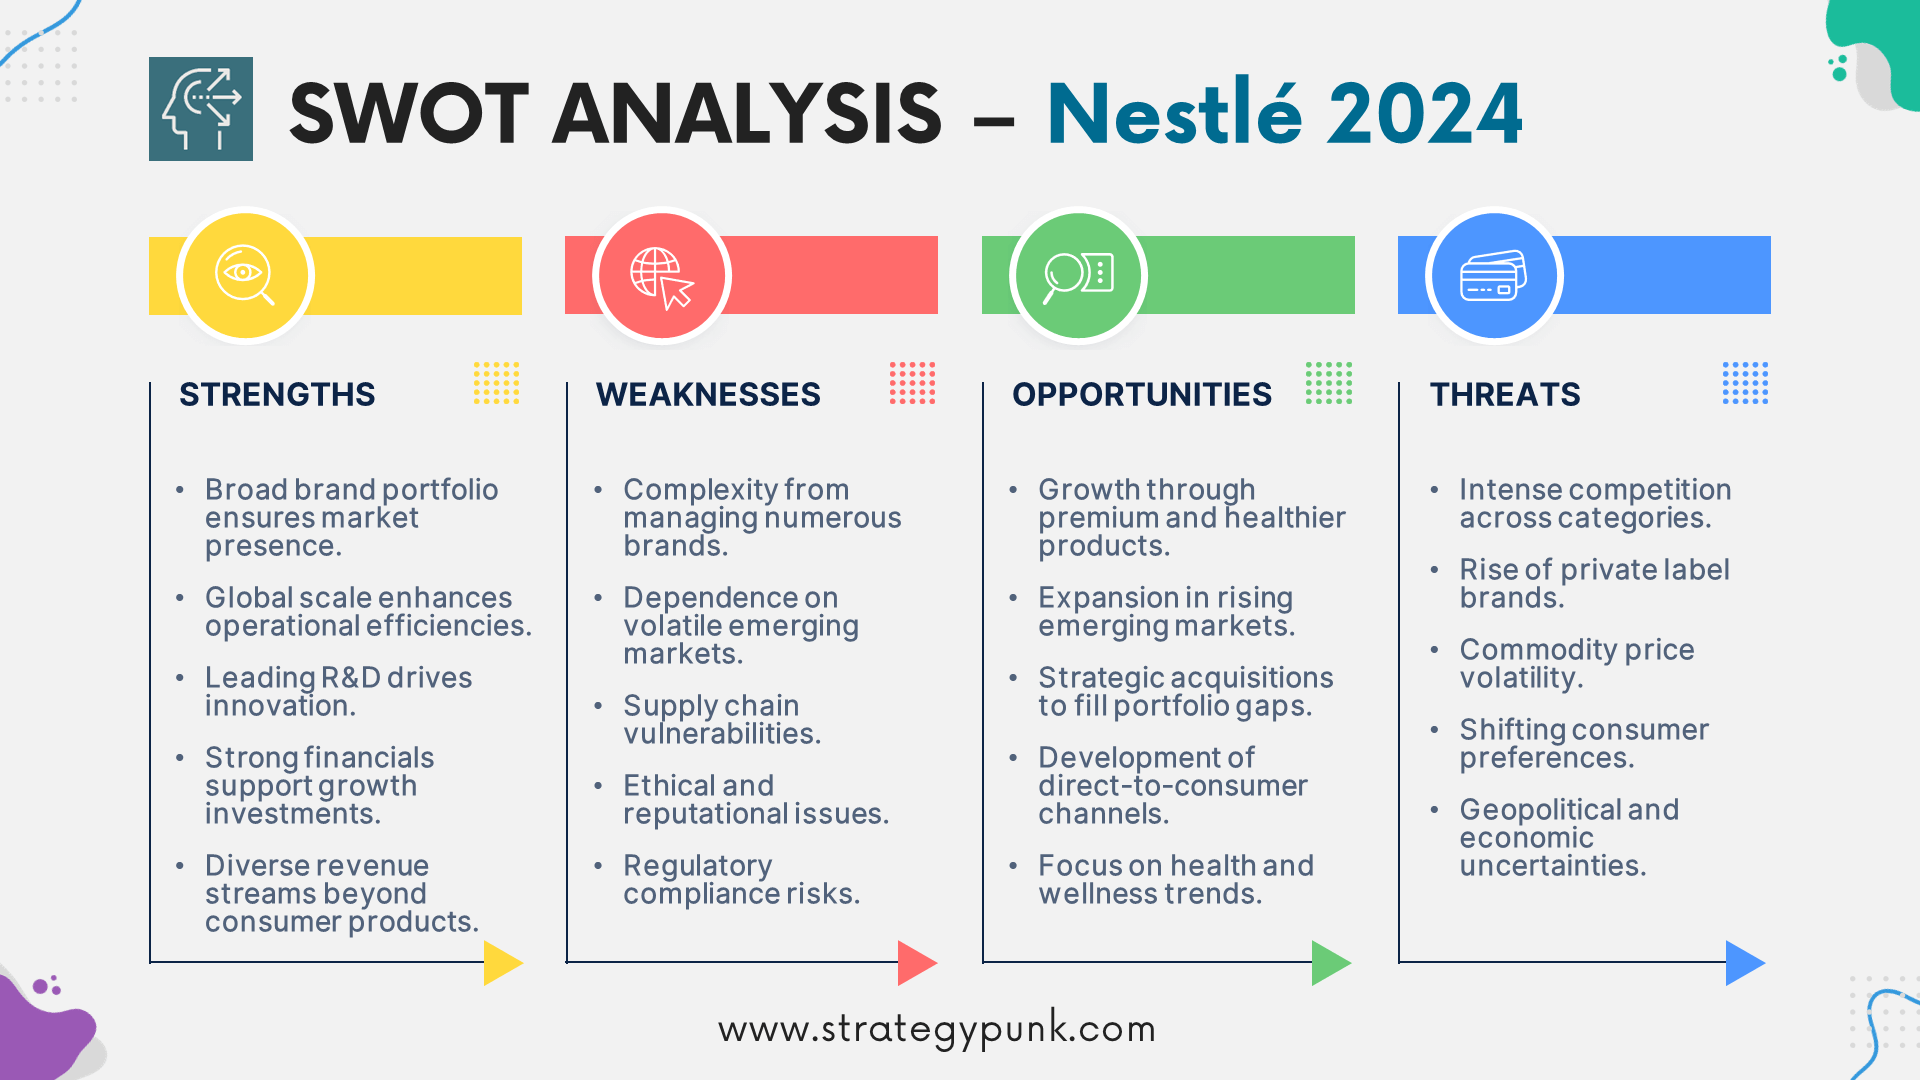 Strategic Insights 2024: A SWOT Analysis of Nestle (Plus Free PPT)